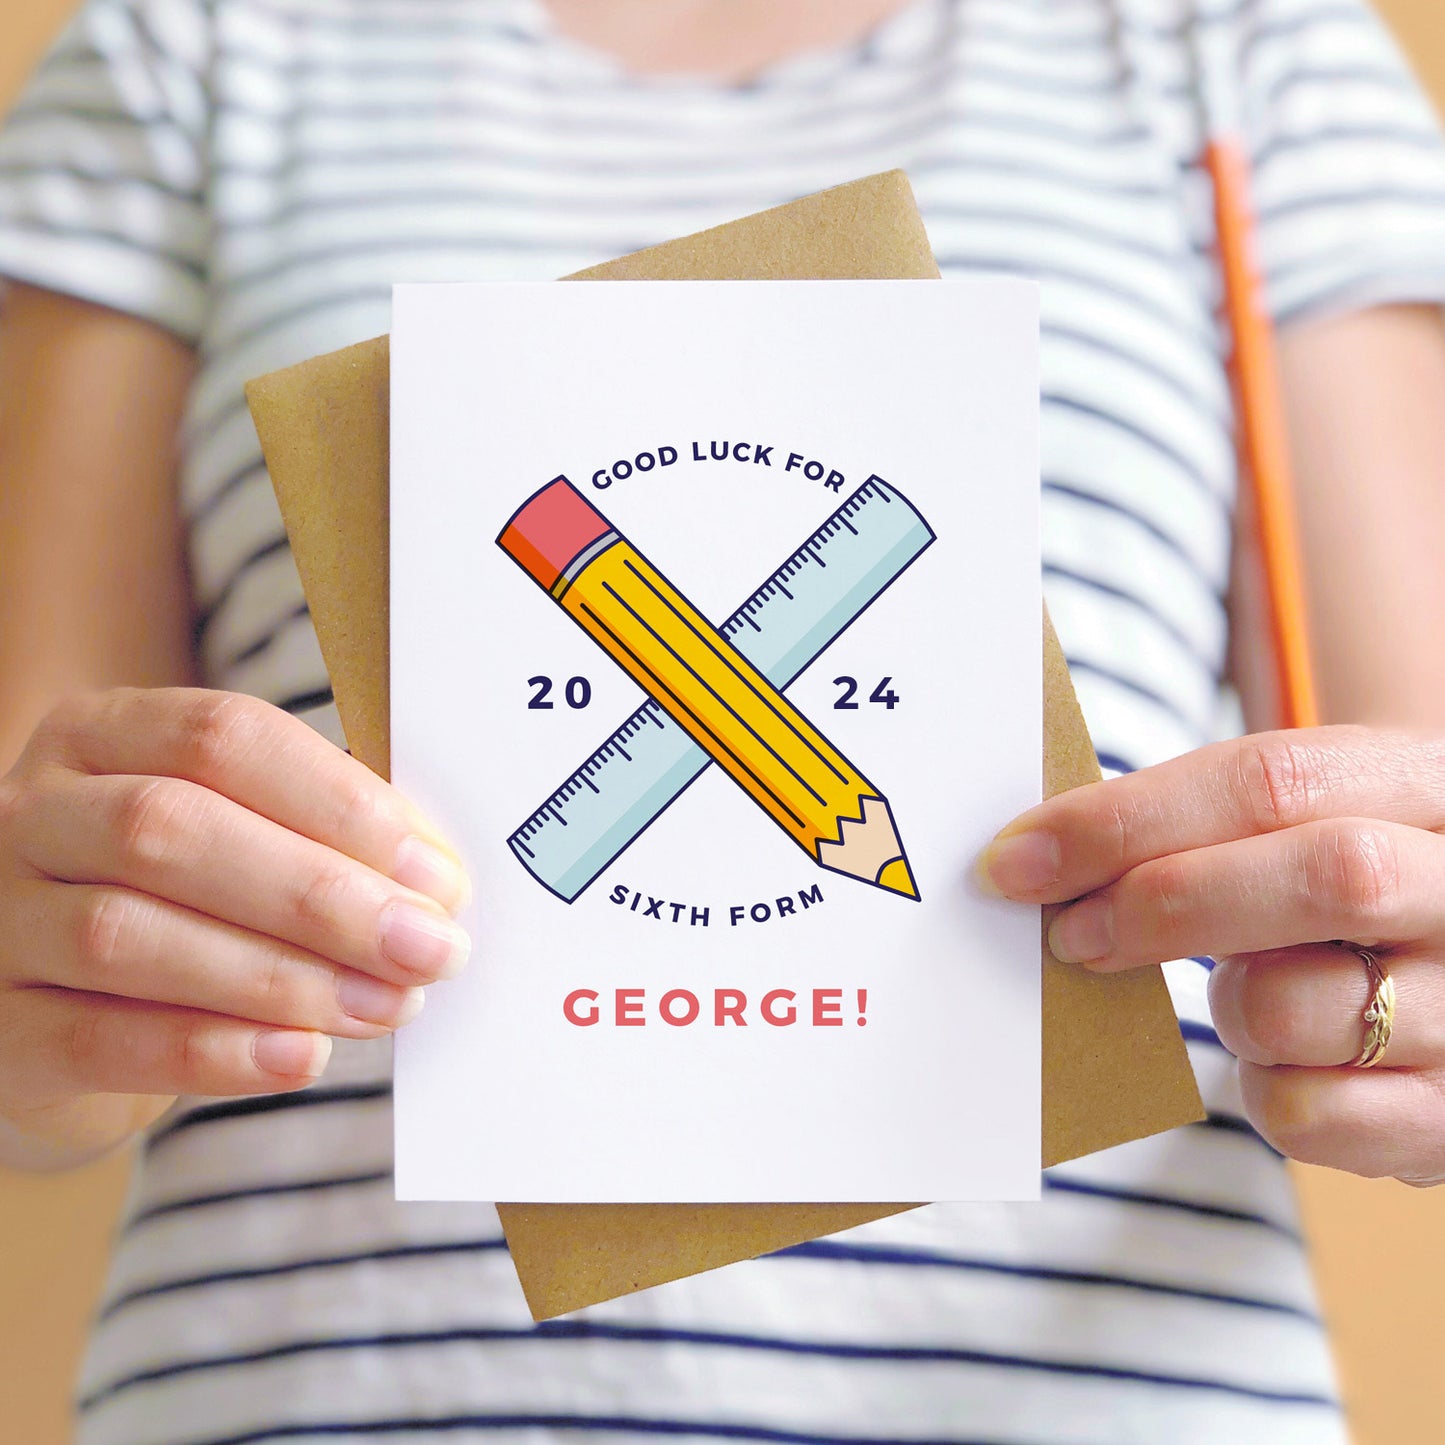 Good luck for 6th form personalised back to school card featuring a pencil, ruler and the young persons name. The card is being held by a person in a stripy white and blue t-shirt.